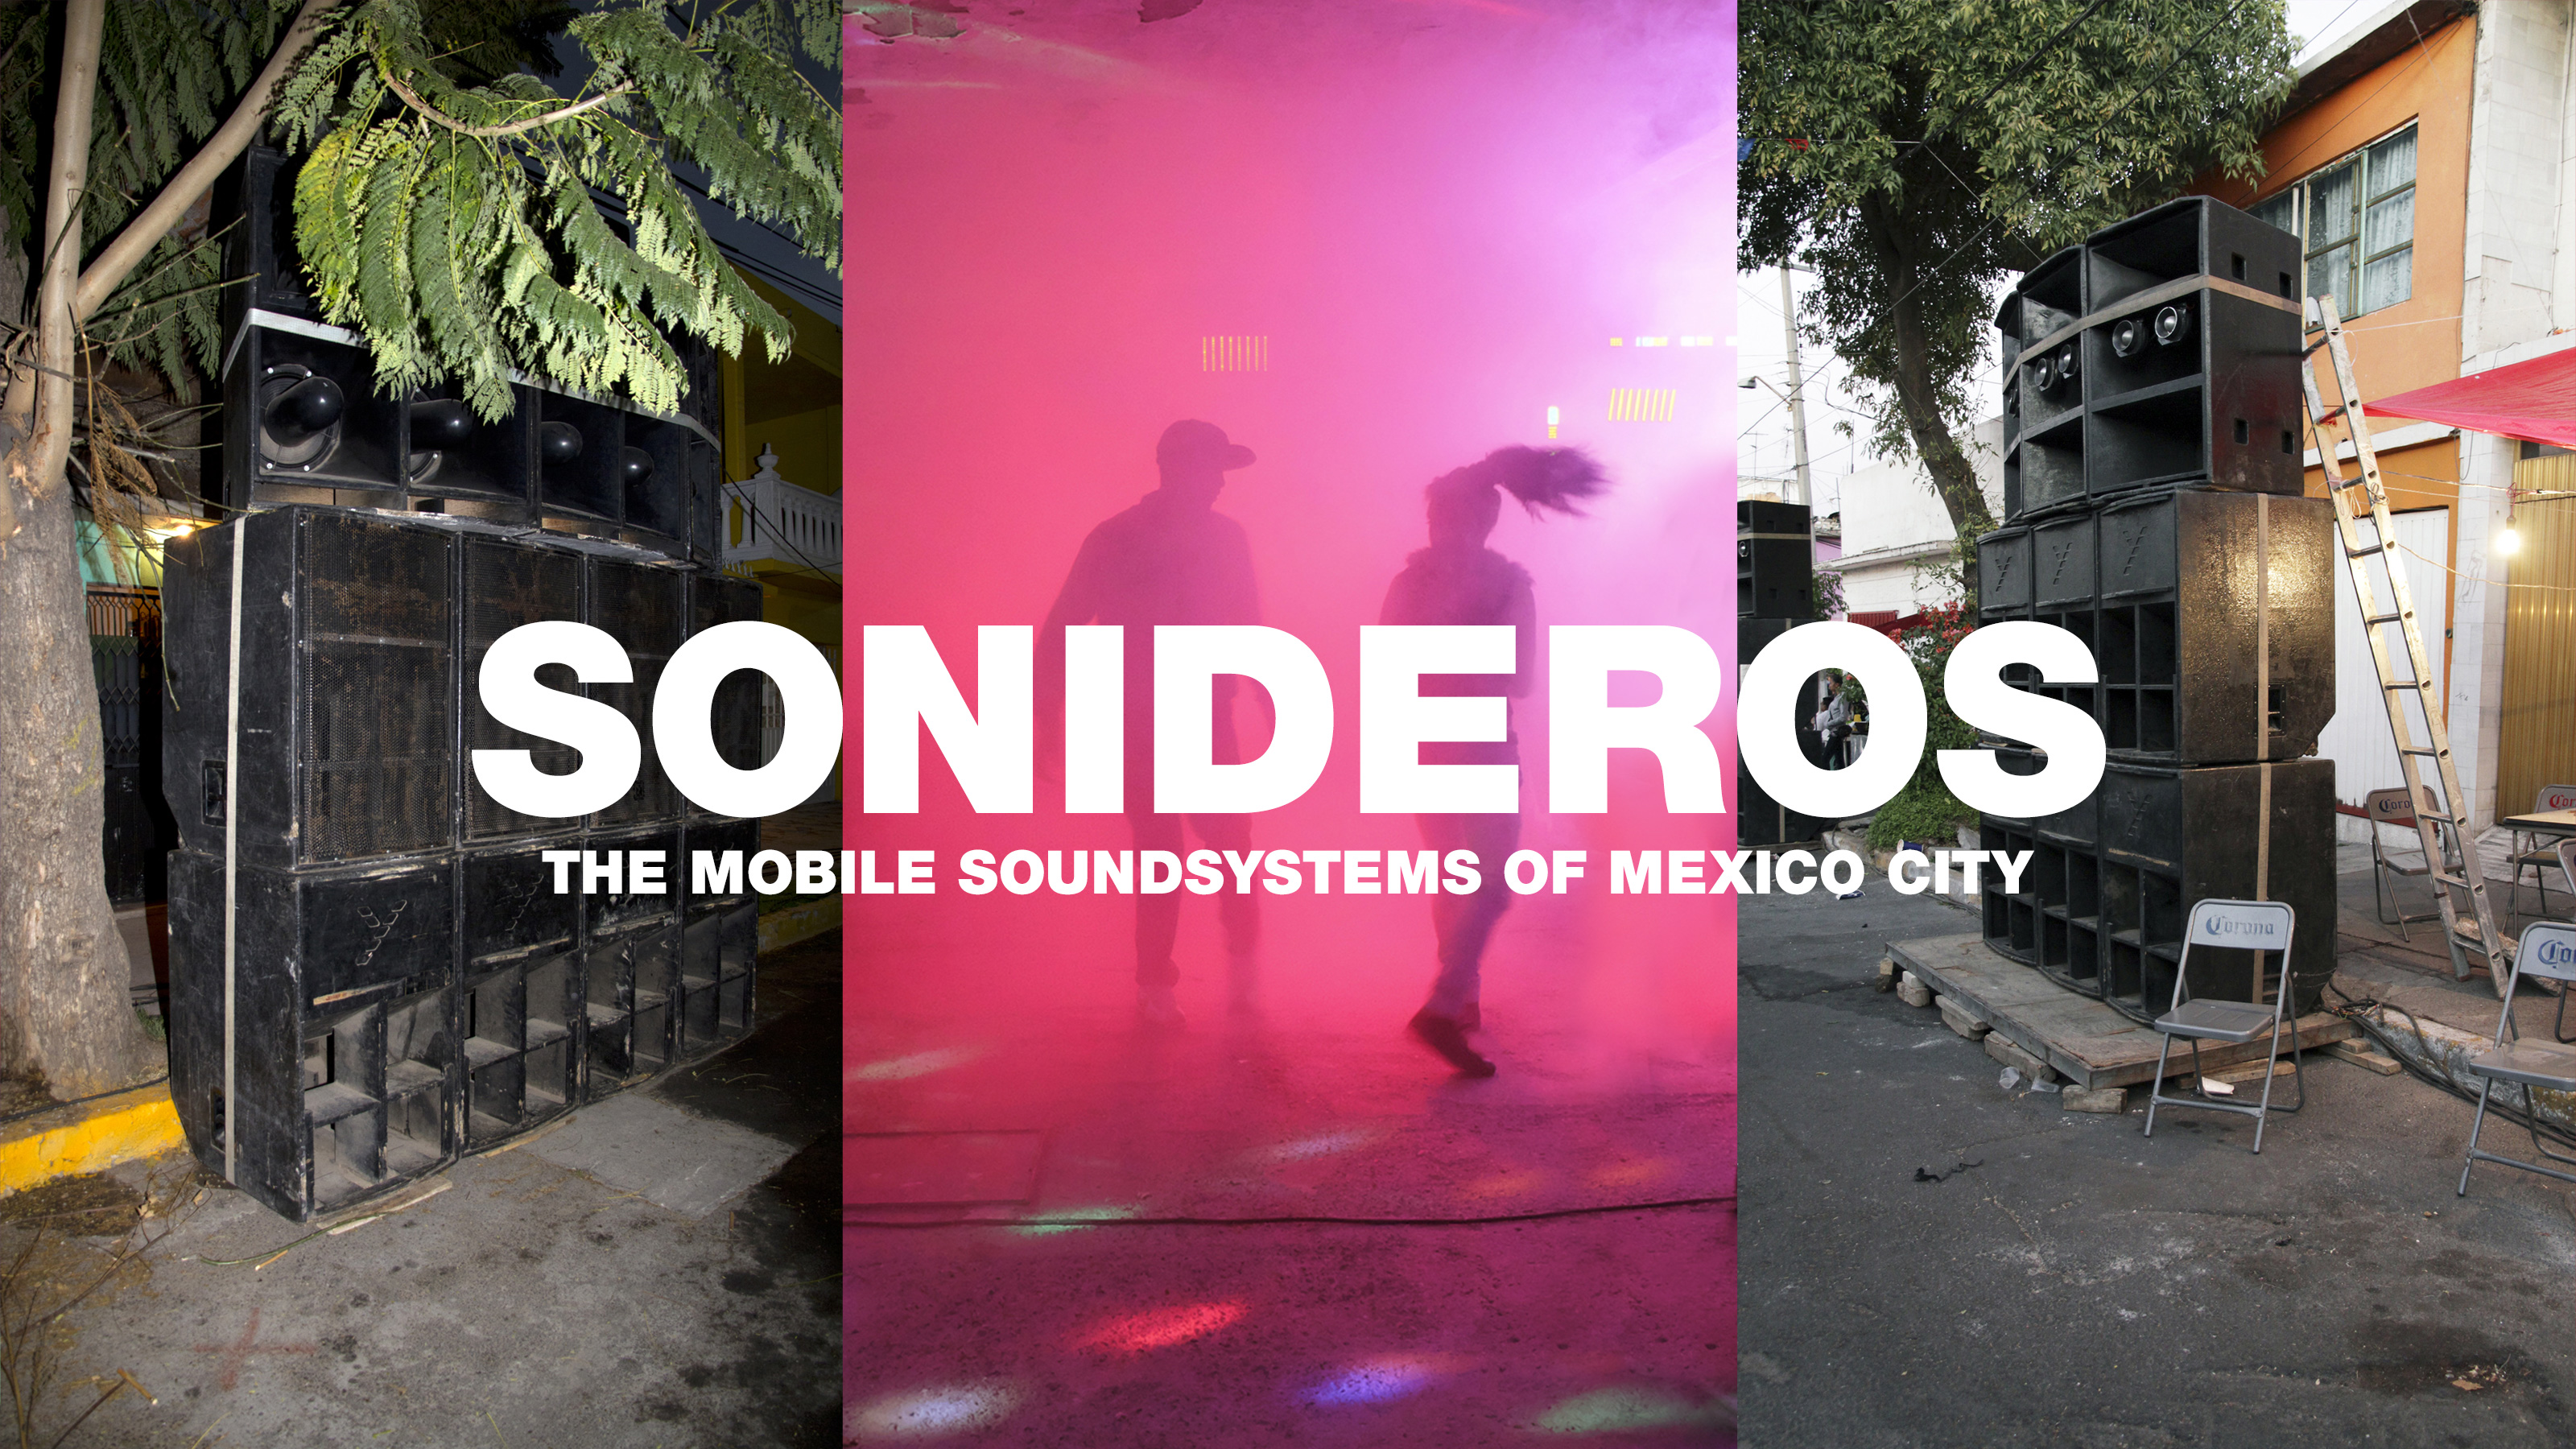 Sonideros: The mobile soundsystems of Mexico City